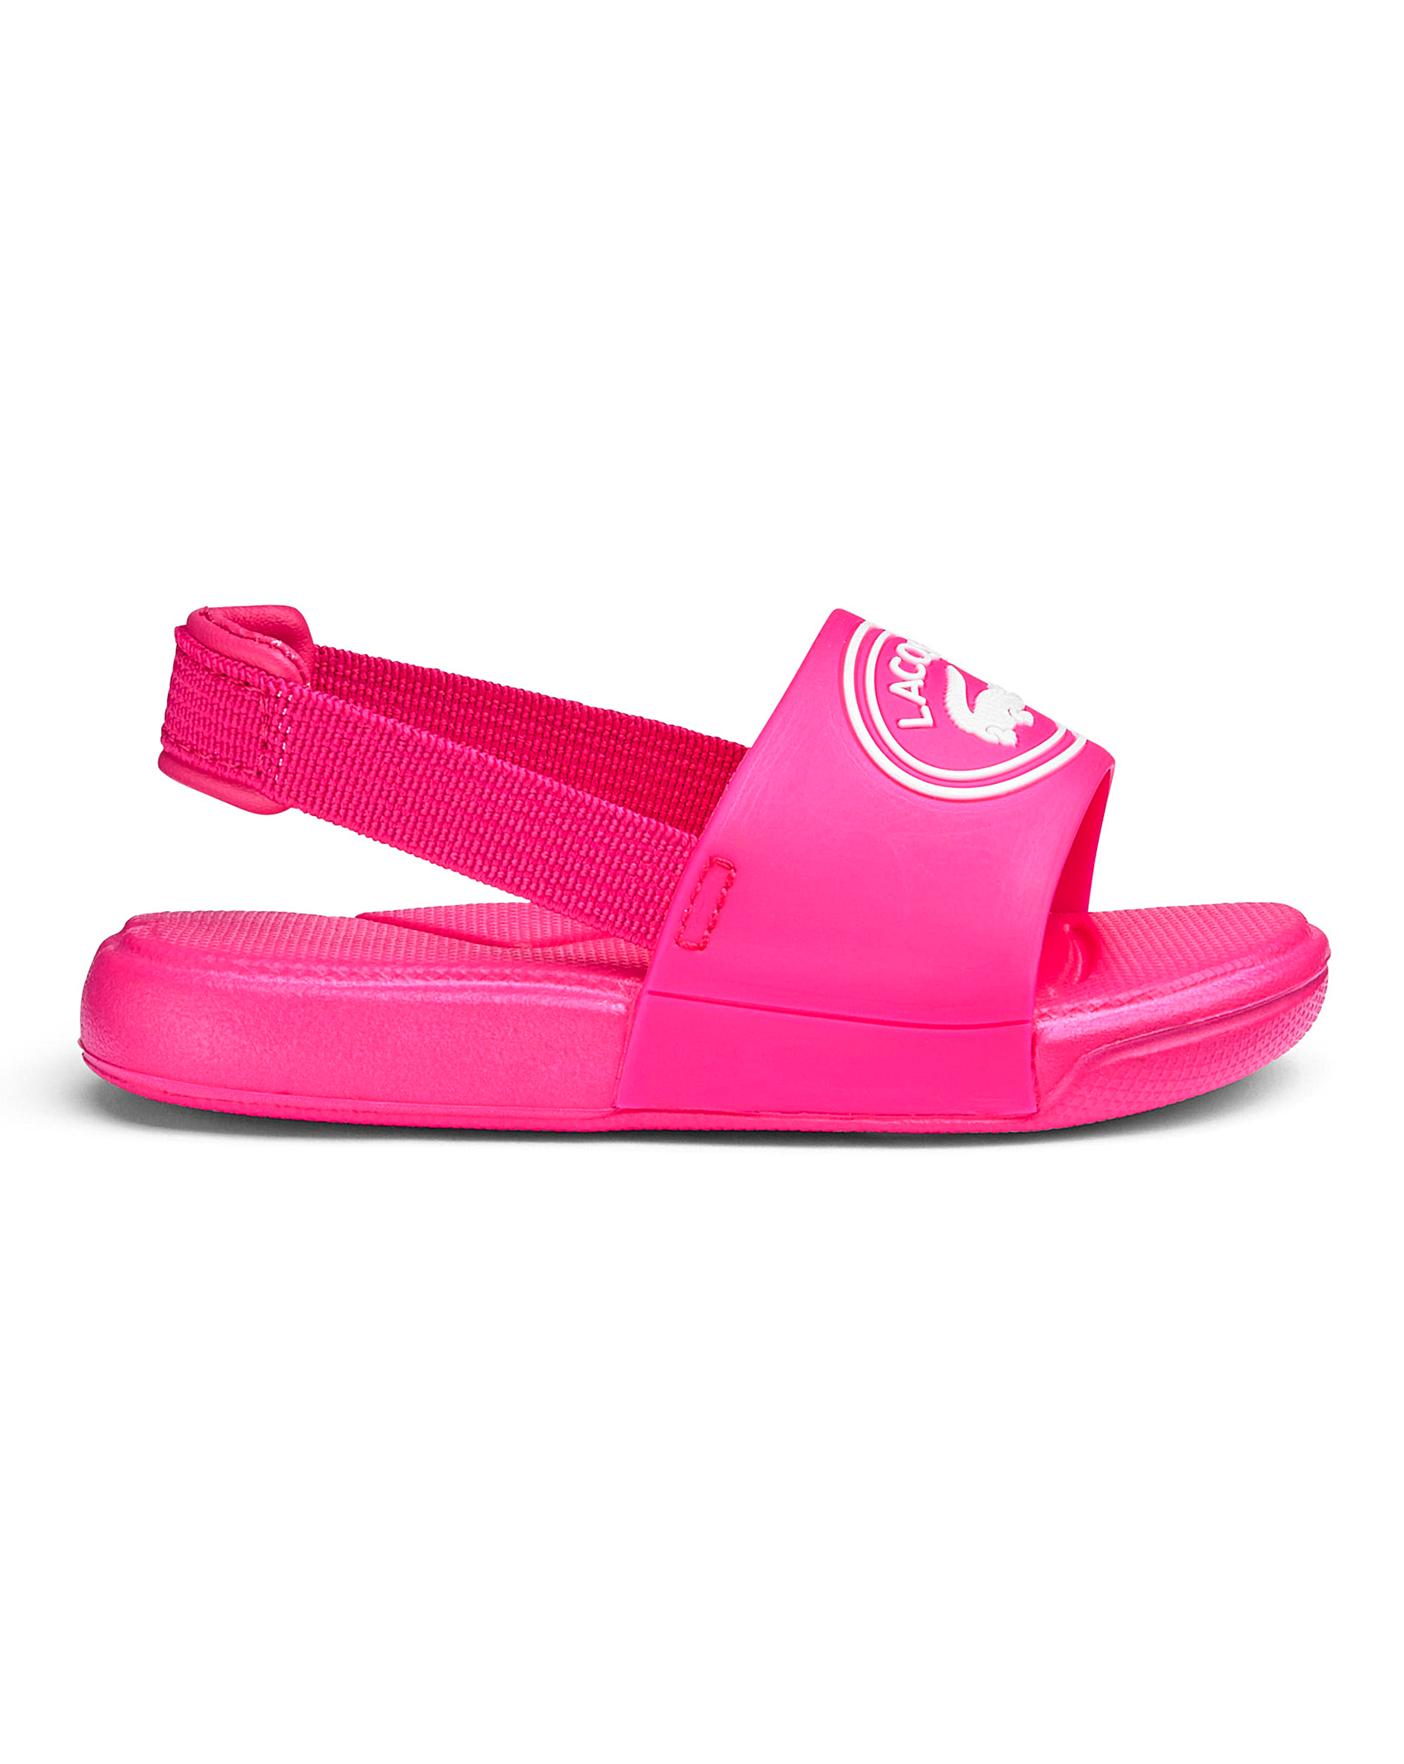 pink lacoste sliders